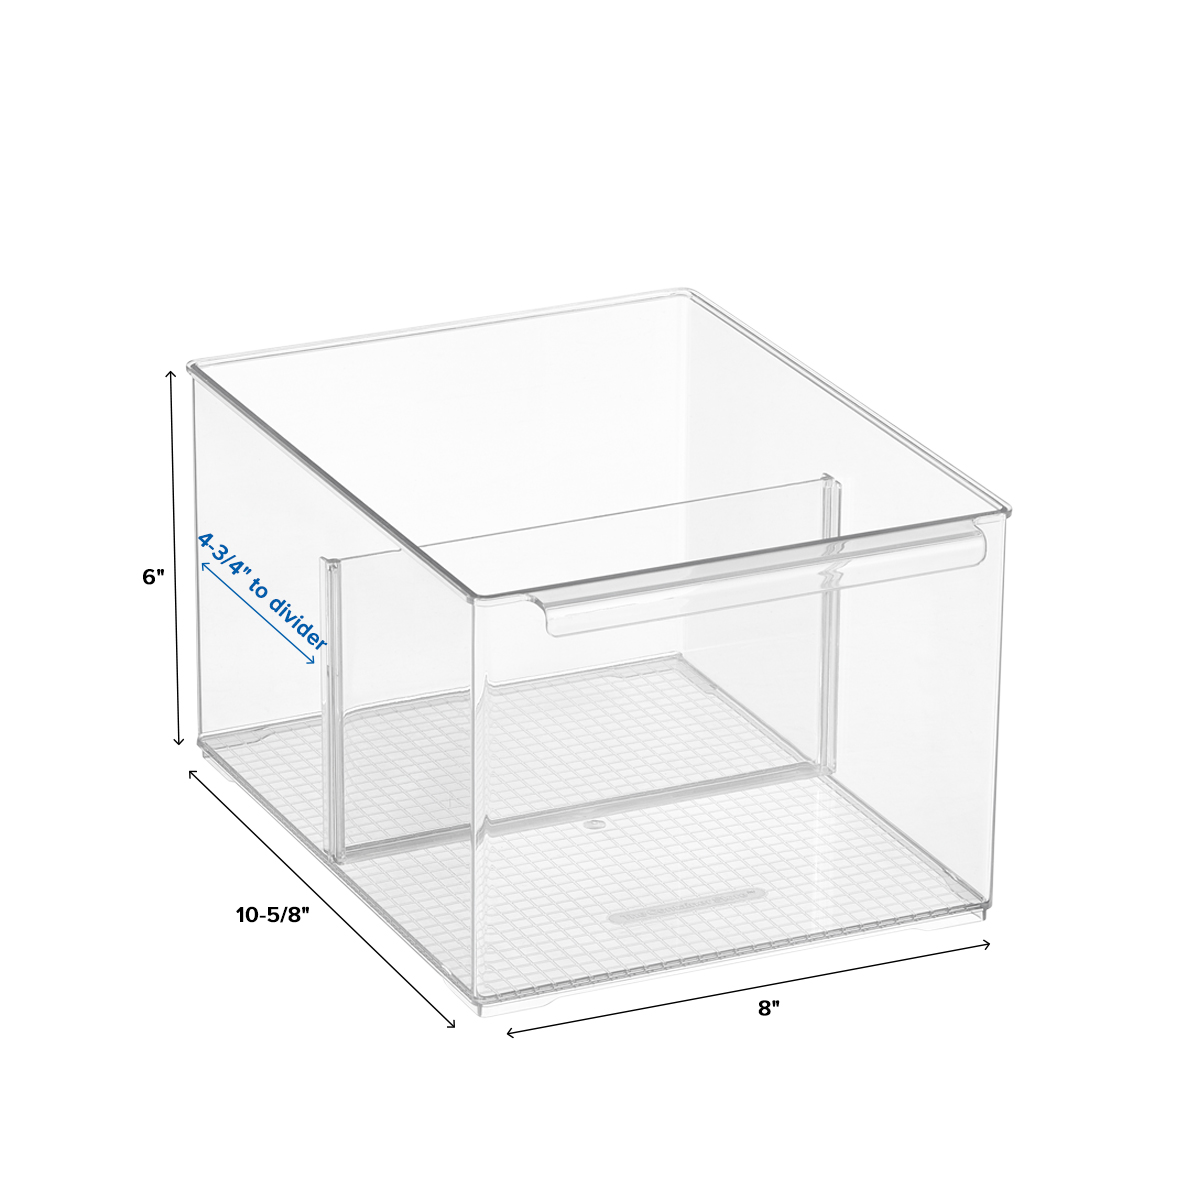 https://www.containerstore.com/catalogimages/478152/10087164_11_Inch_Modular_Pantry_Bin_.jpg